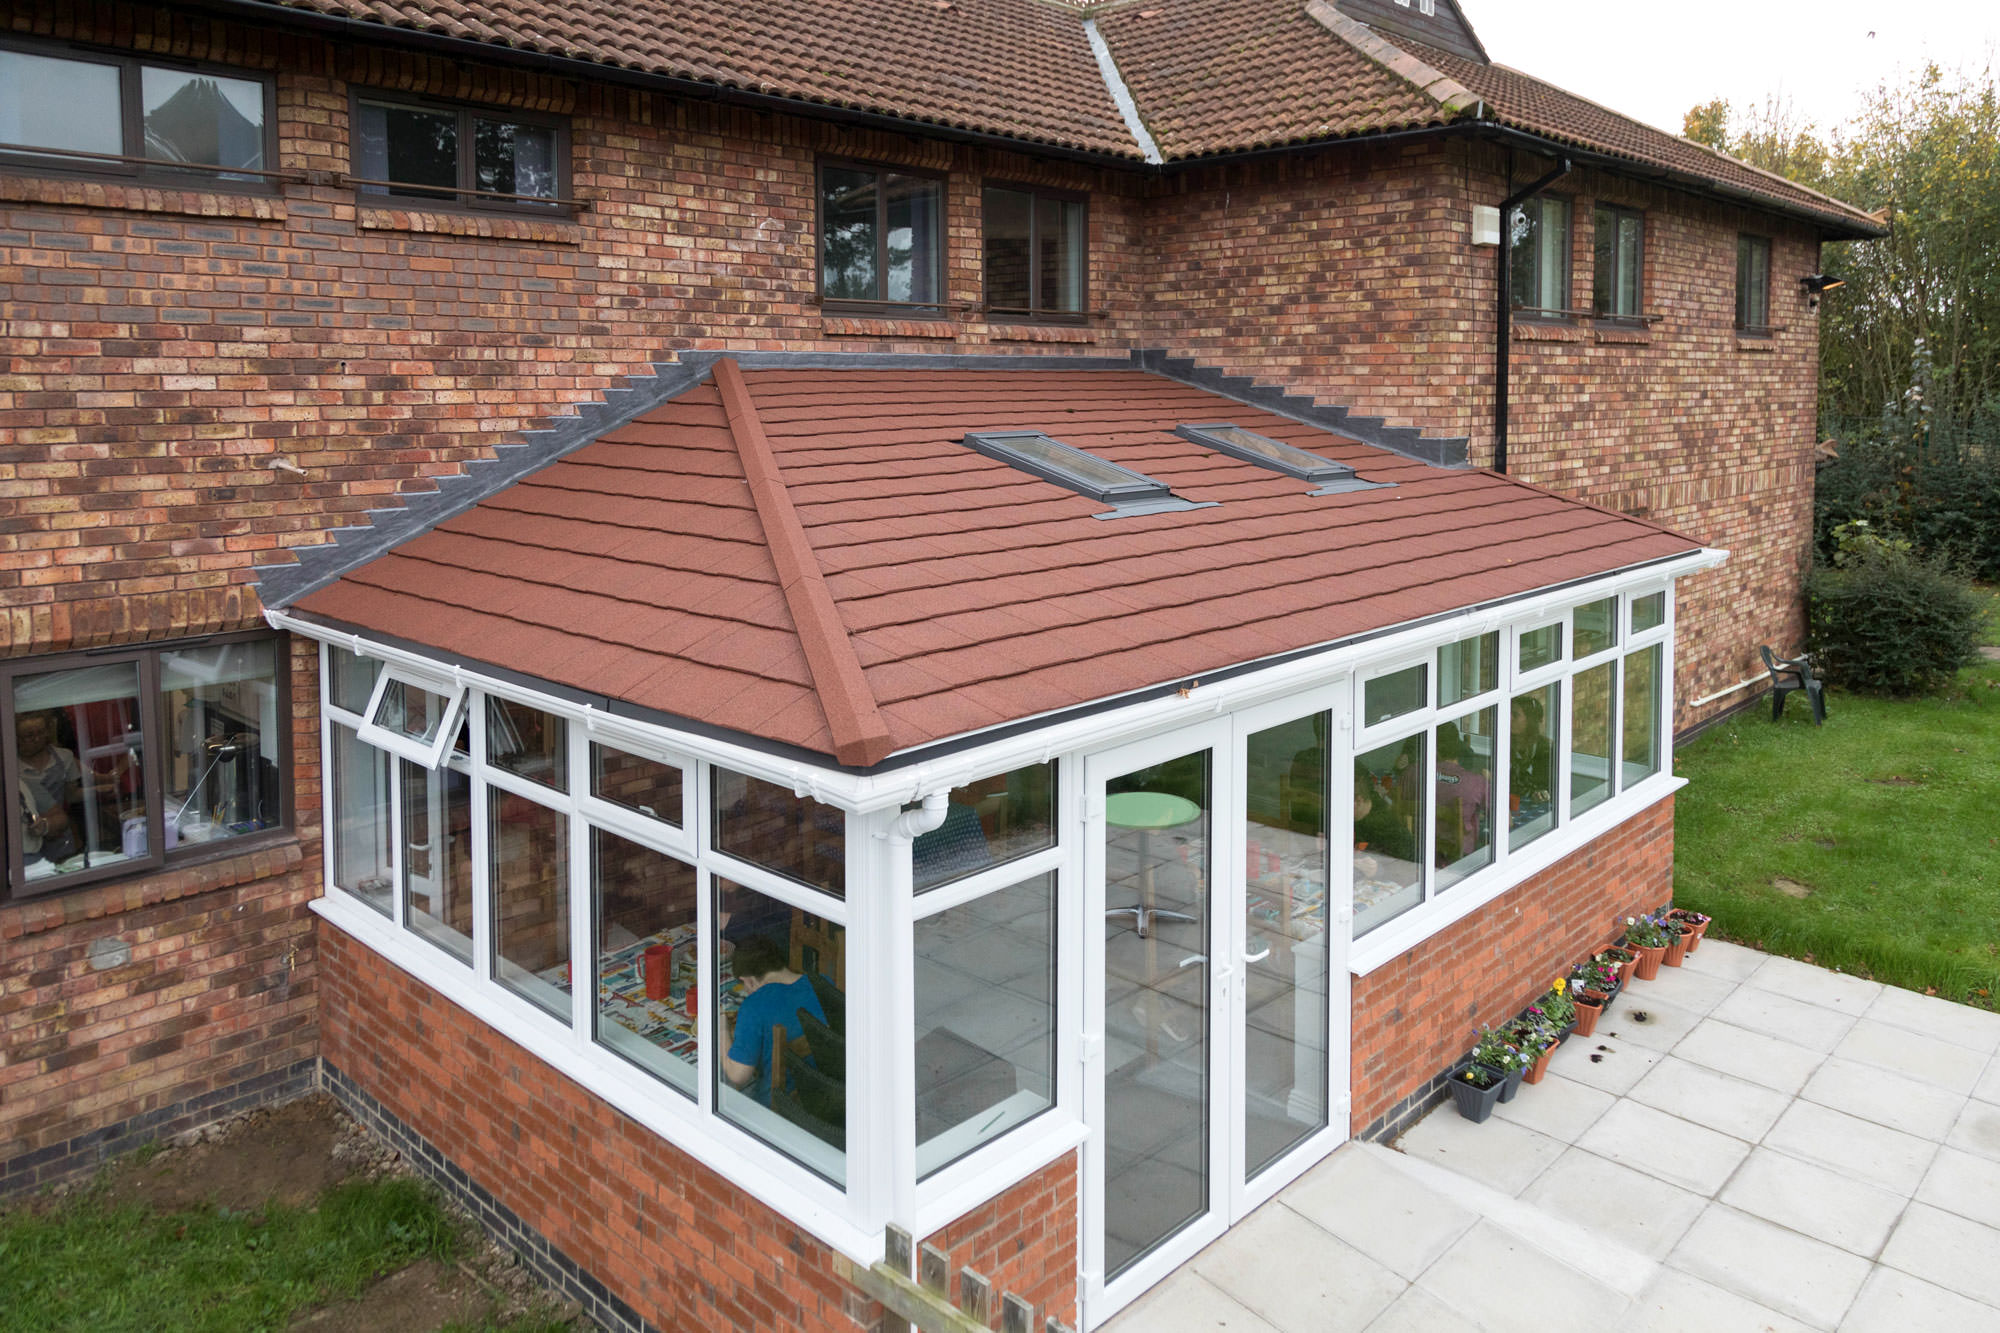 Supalite Tiled Conservatory Roof